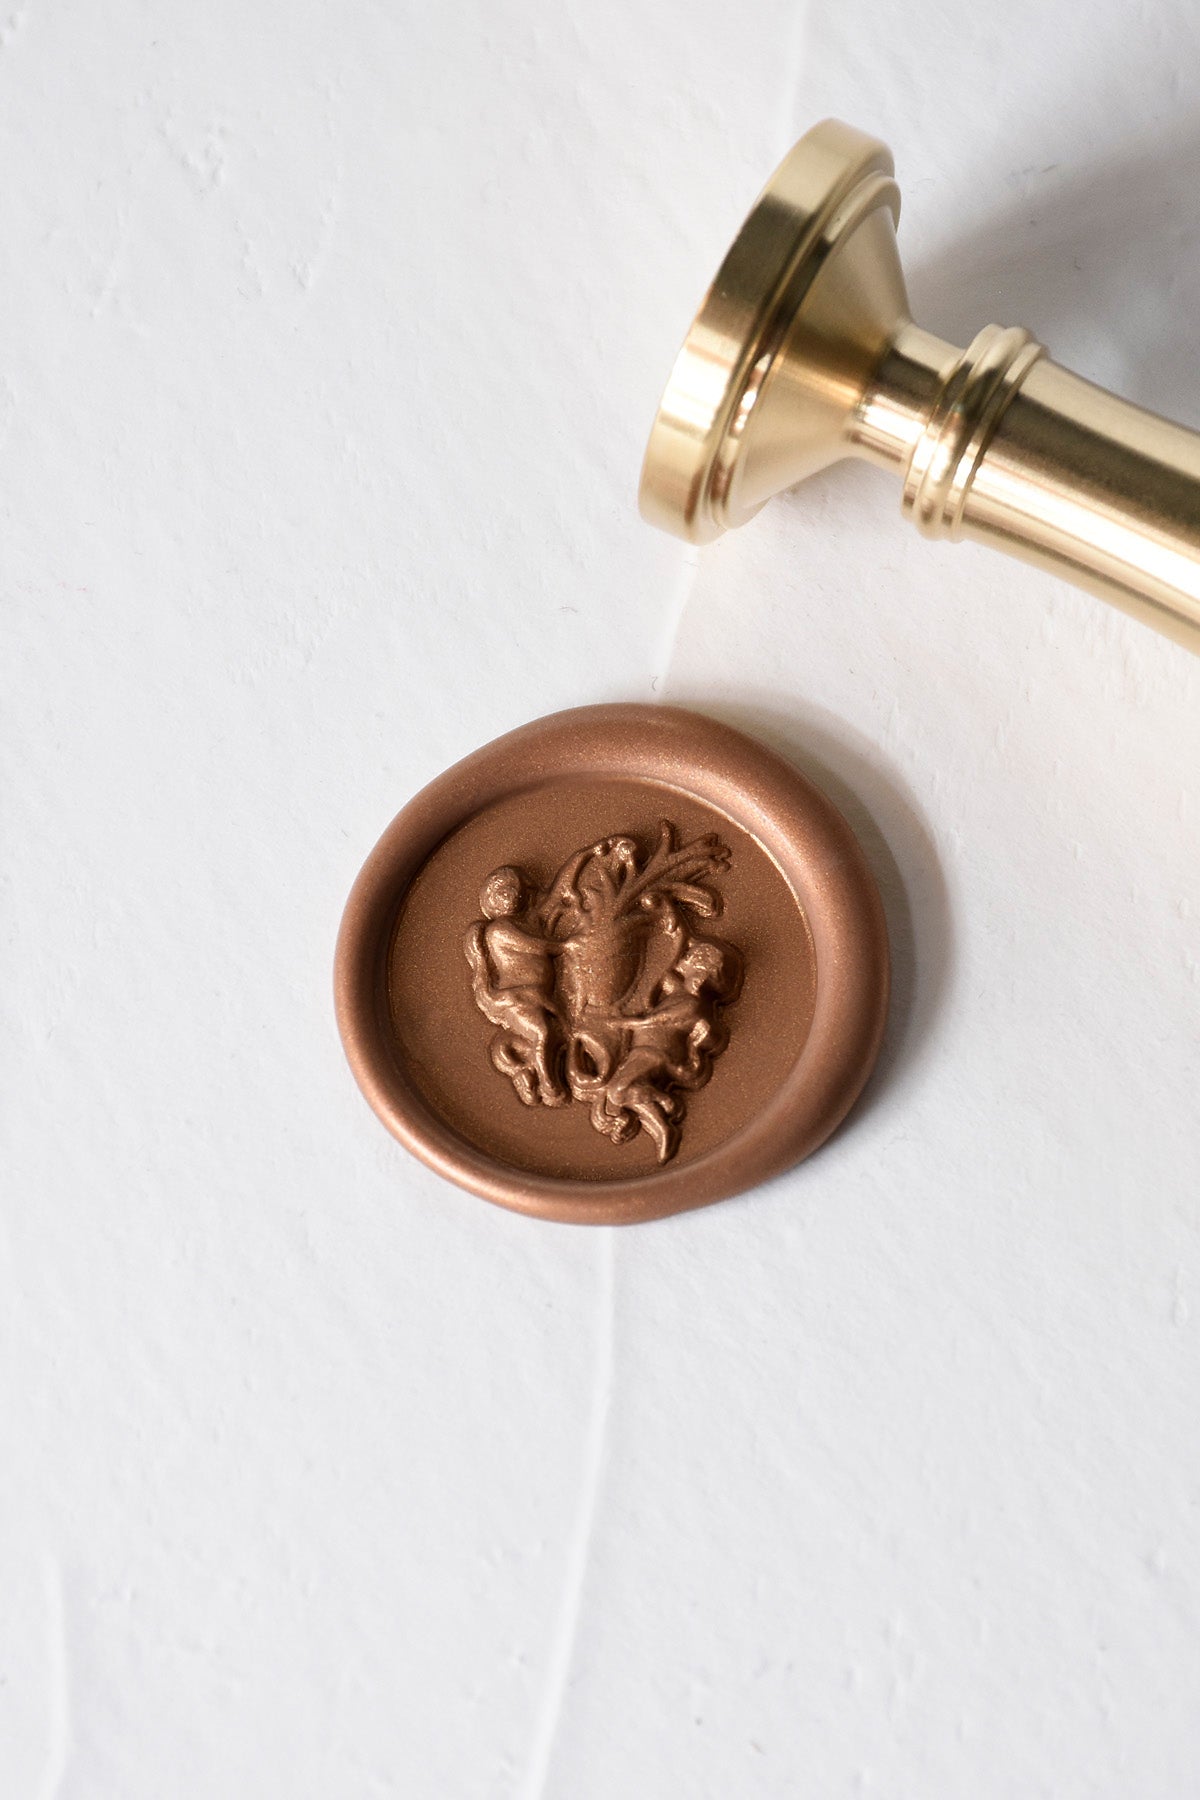 Wax Seal Stamp Head - Brass - 9 Patterns Available - ApolloBox